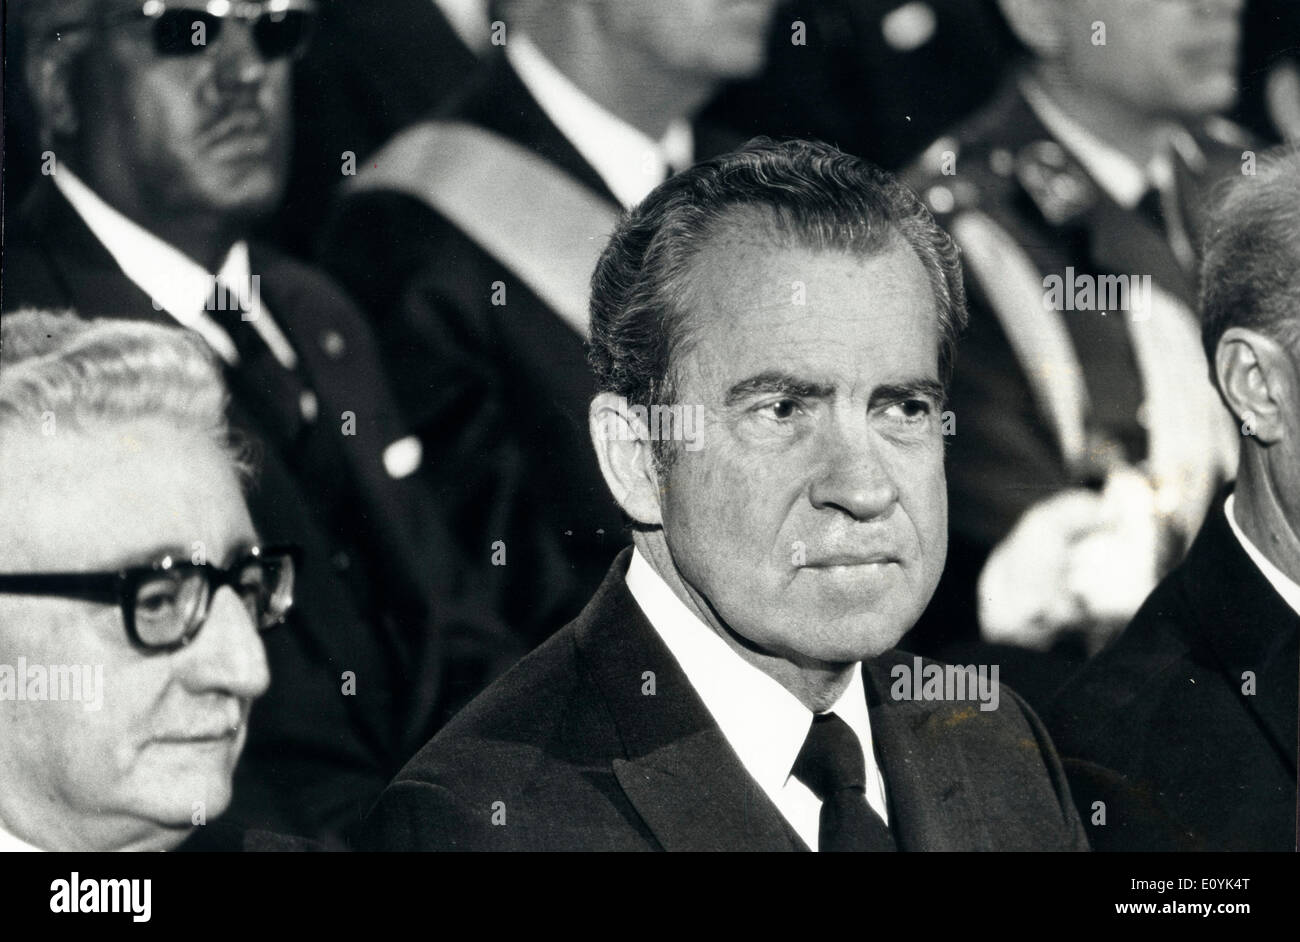 Feb 08, 1974 - Paris, France - RICHARD NIXON (January 9, 1913 Ð April 22, 1994) was the 37th President of the United States (1969Ð1974), having formerly been the 36th Vice President of the United States (1953Ð1961). A member of the Republican Party, he was the only President to resign the office as well as the only person to be elected twice to both the Presidency and the Vice Presidency. Hommage to George Pompidou. Stock Photo